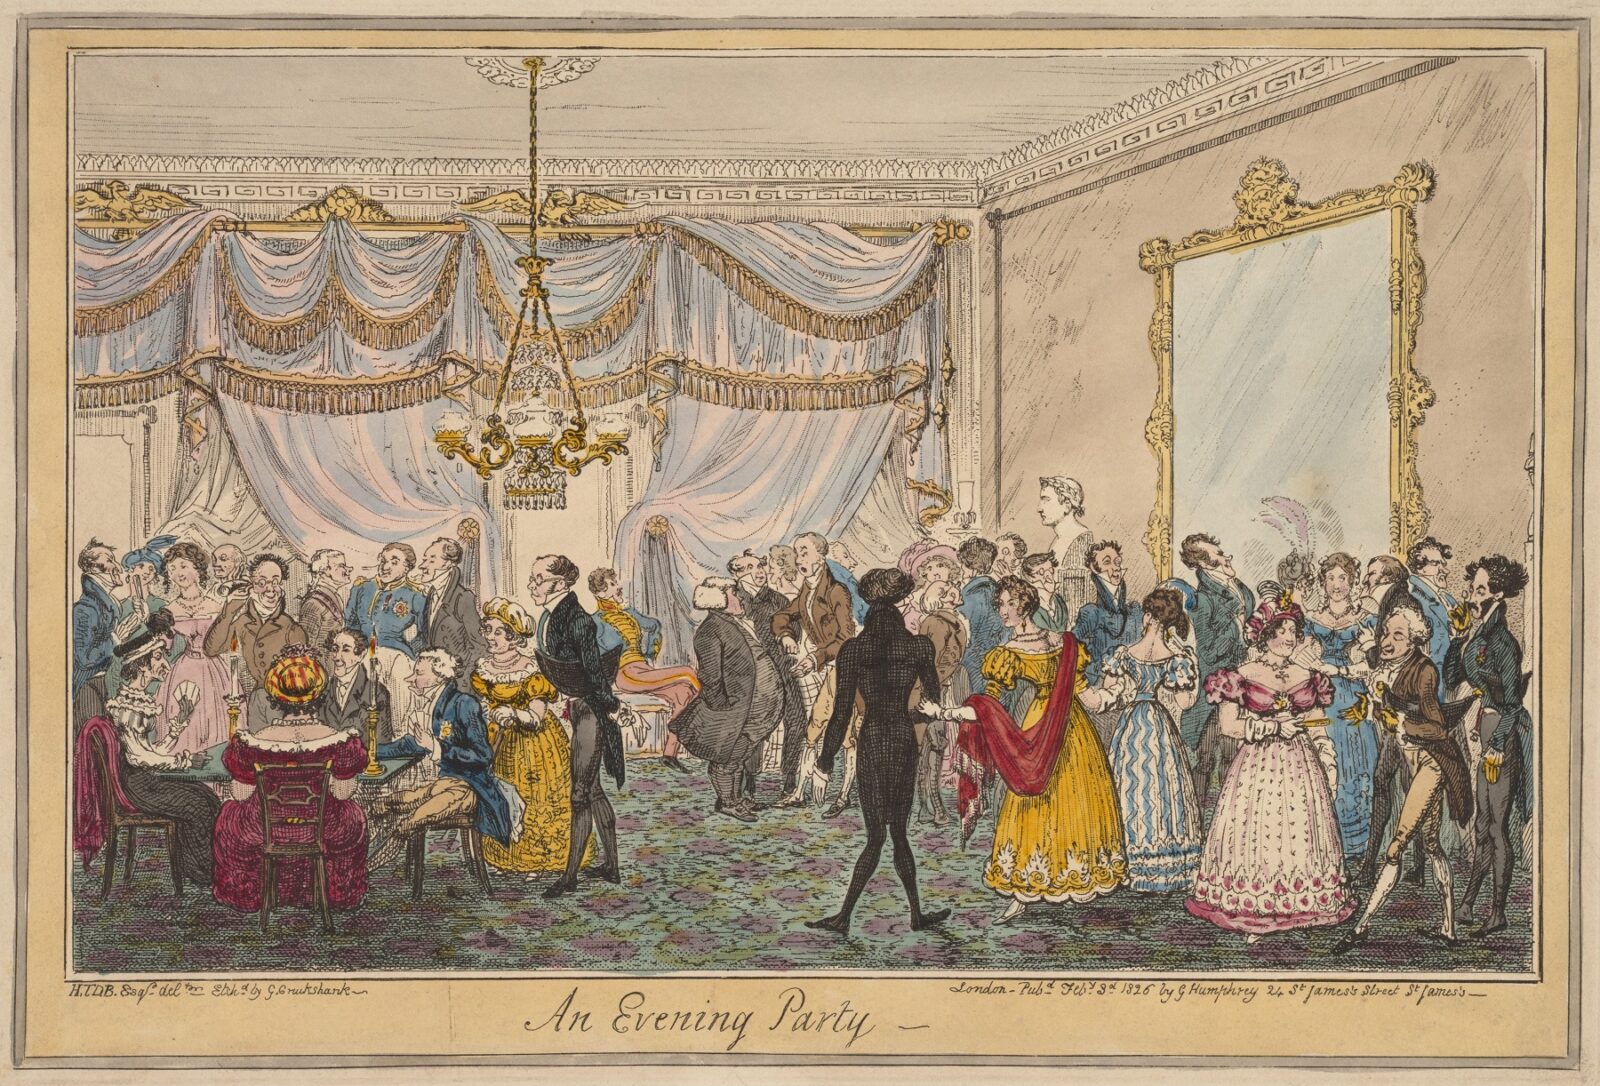 An Evening Party by George Cruikshank (British, London 1792–1878 London). Image from The Met.